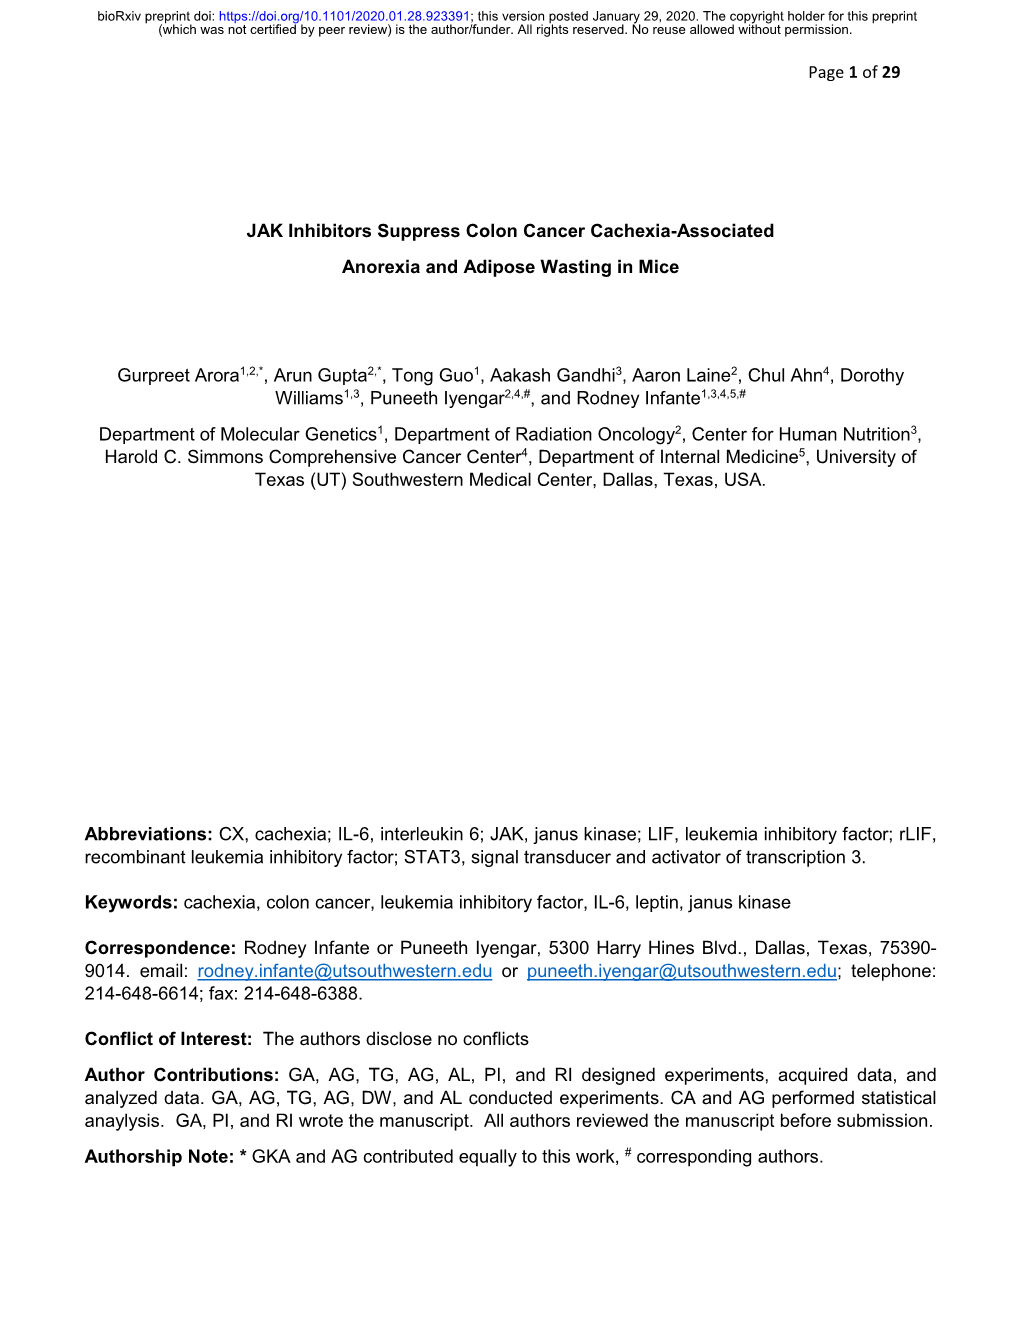 Page 1 of 29 JAK Inhibitors Suppress Colon Cancer Cachexia